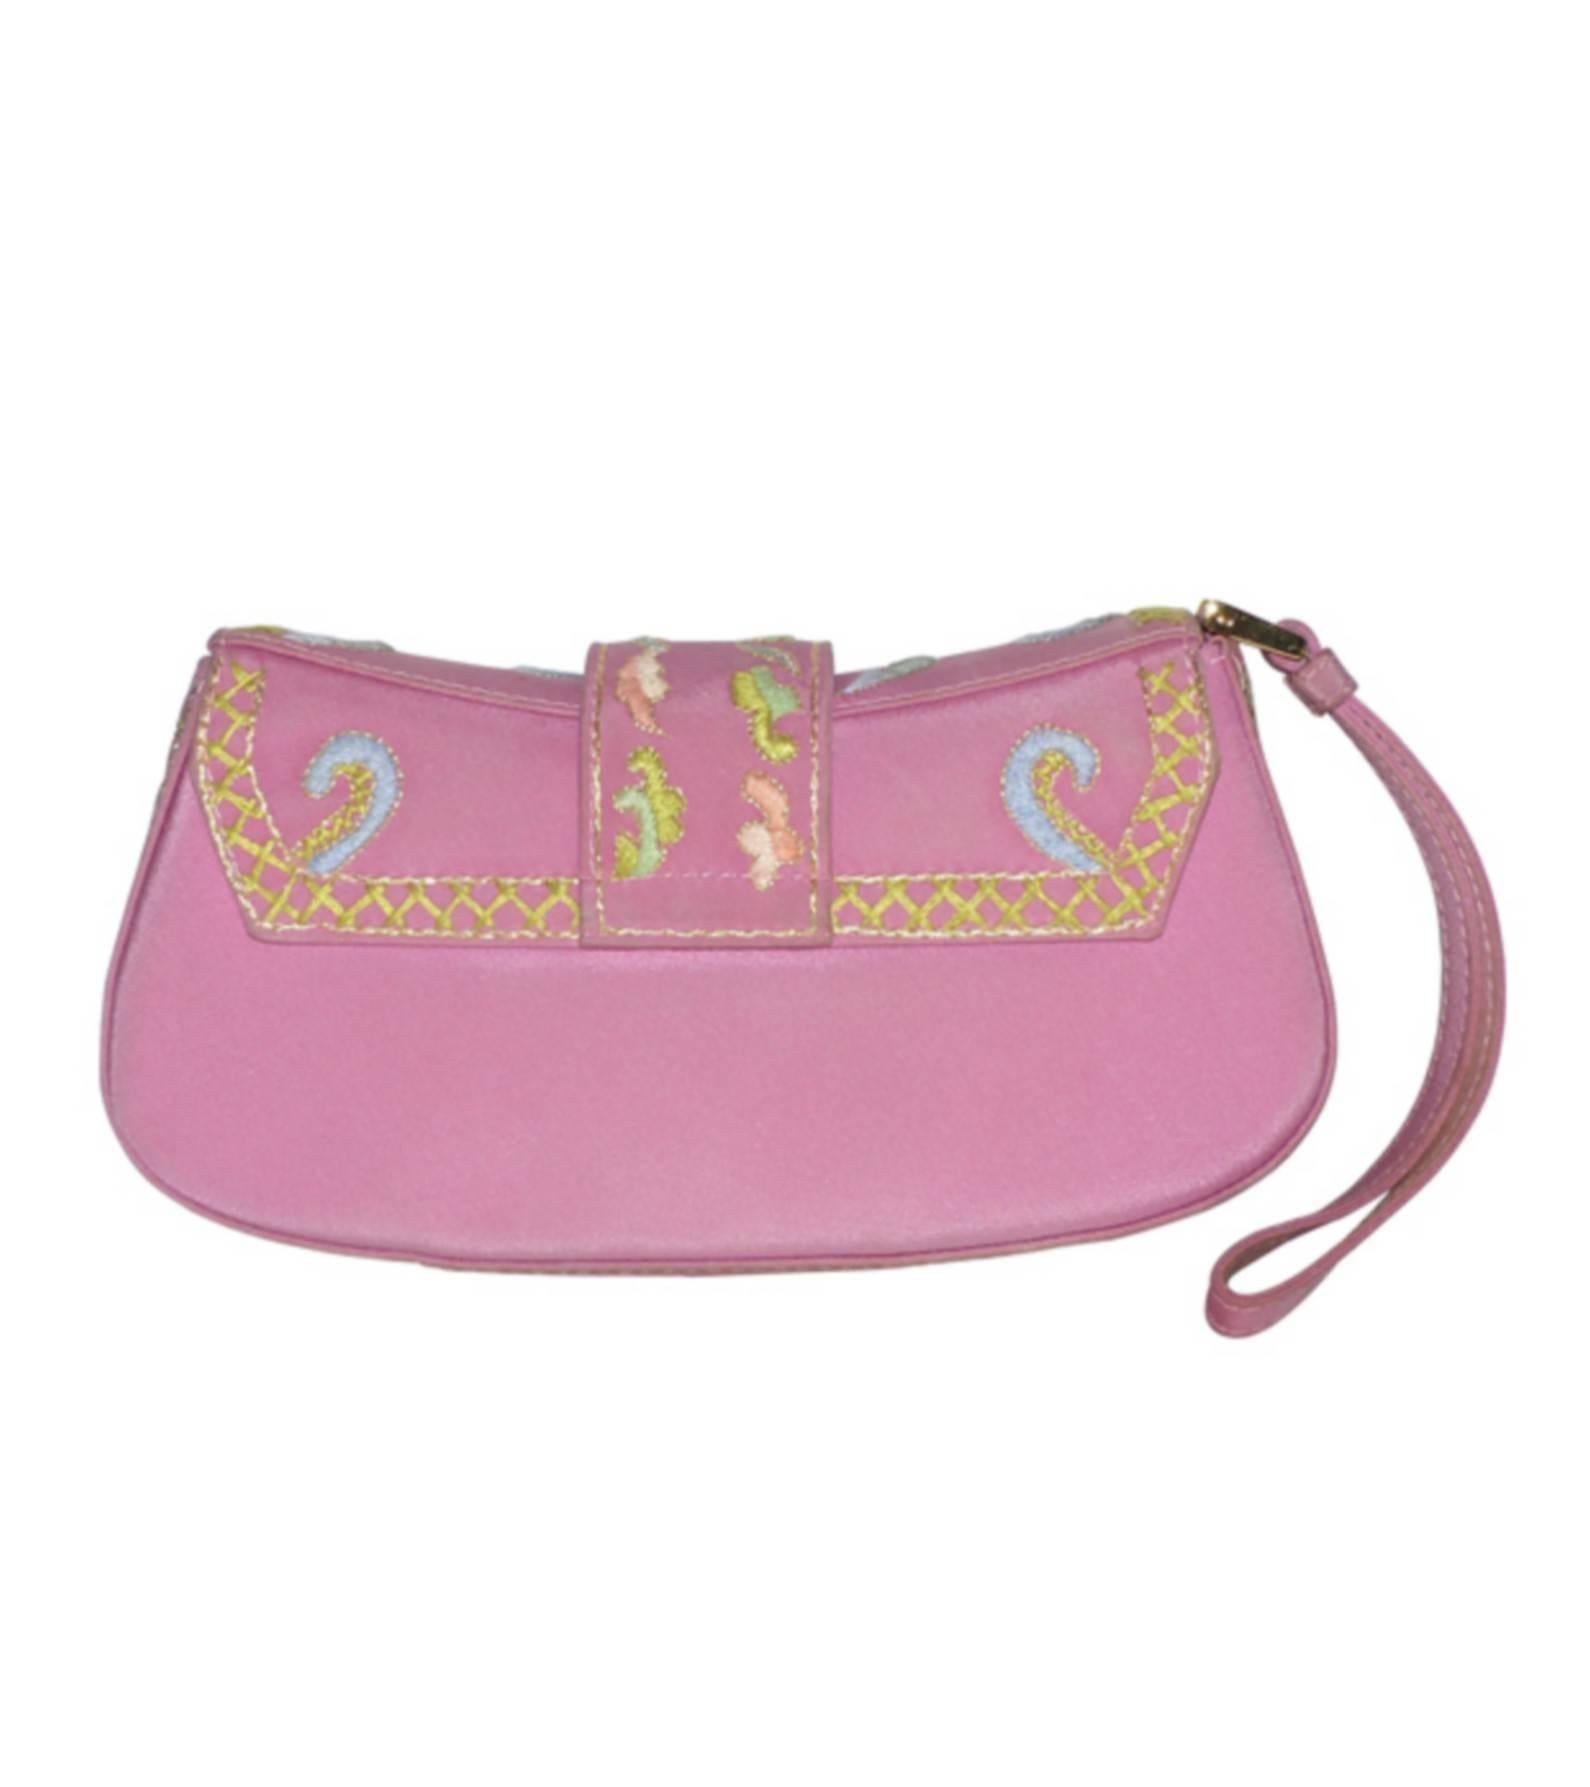 Lovely pink canvas pouch with silver embroidery and multicolored flowers.
Flap closure and pressure.
Anse to wear on the wrist.
1 small open inner pocket
Tonal nylon lining.
Numbered plate 0002
Good Condition
The fabric has some very fine